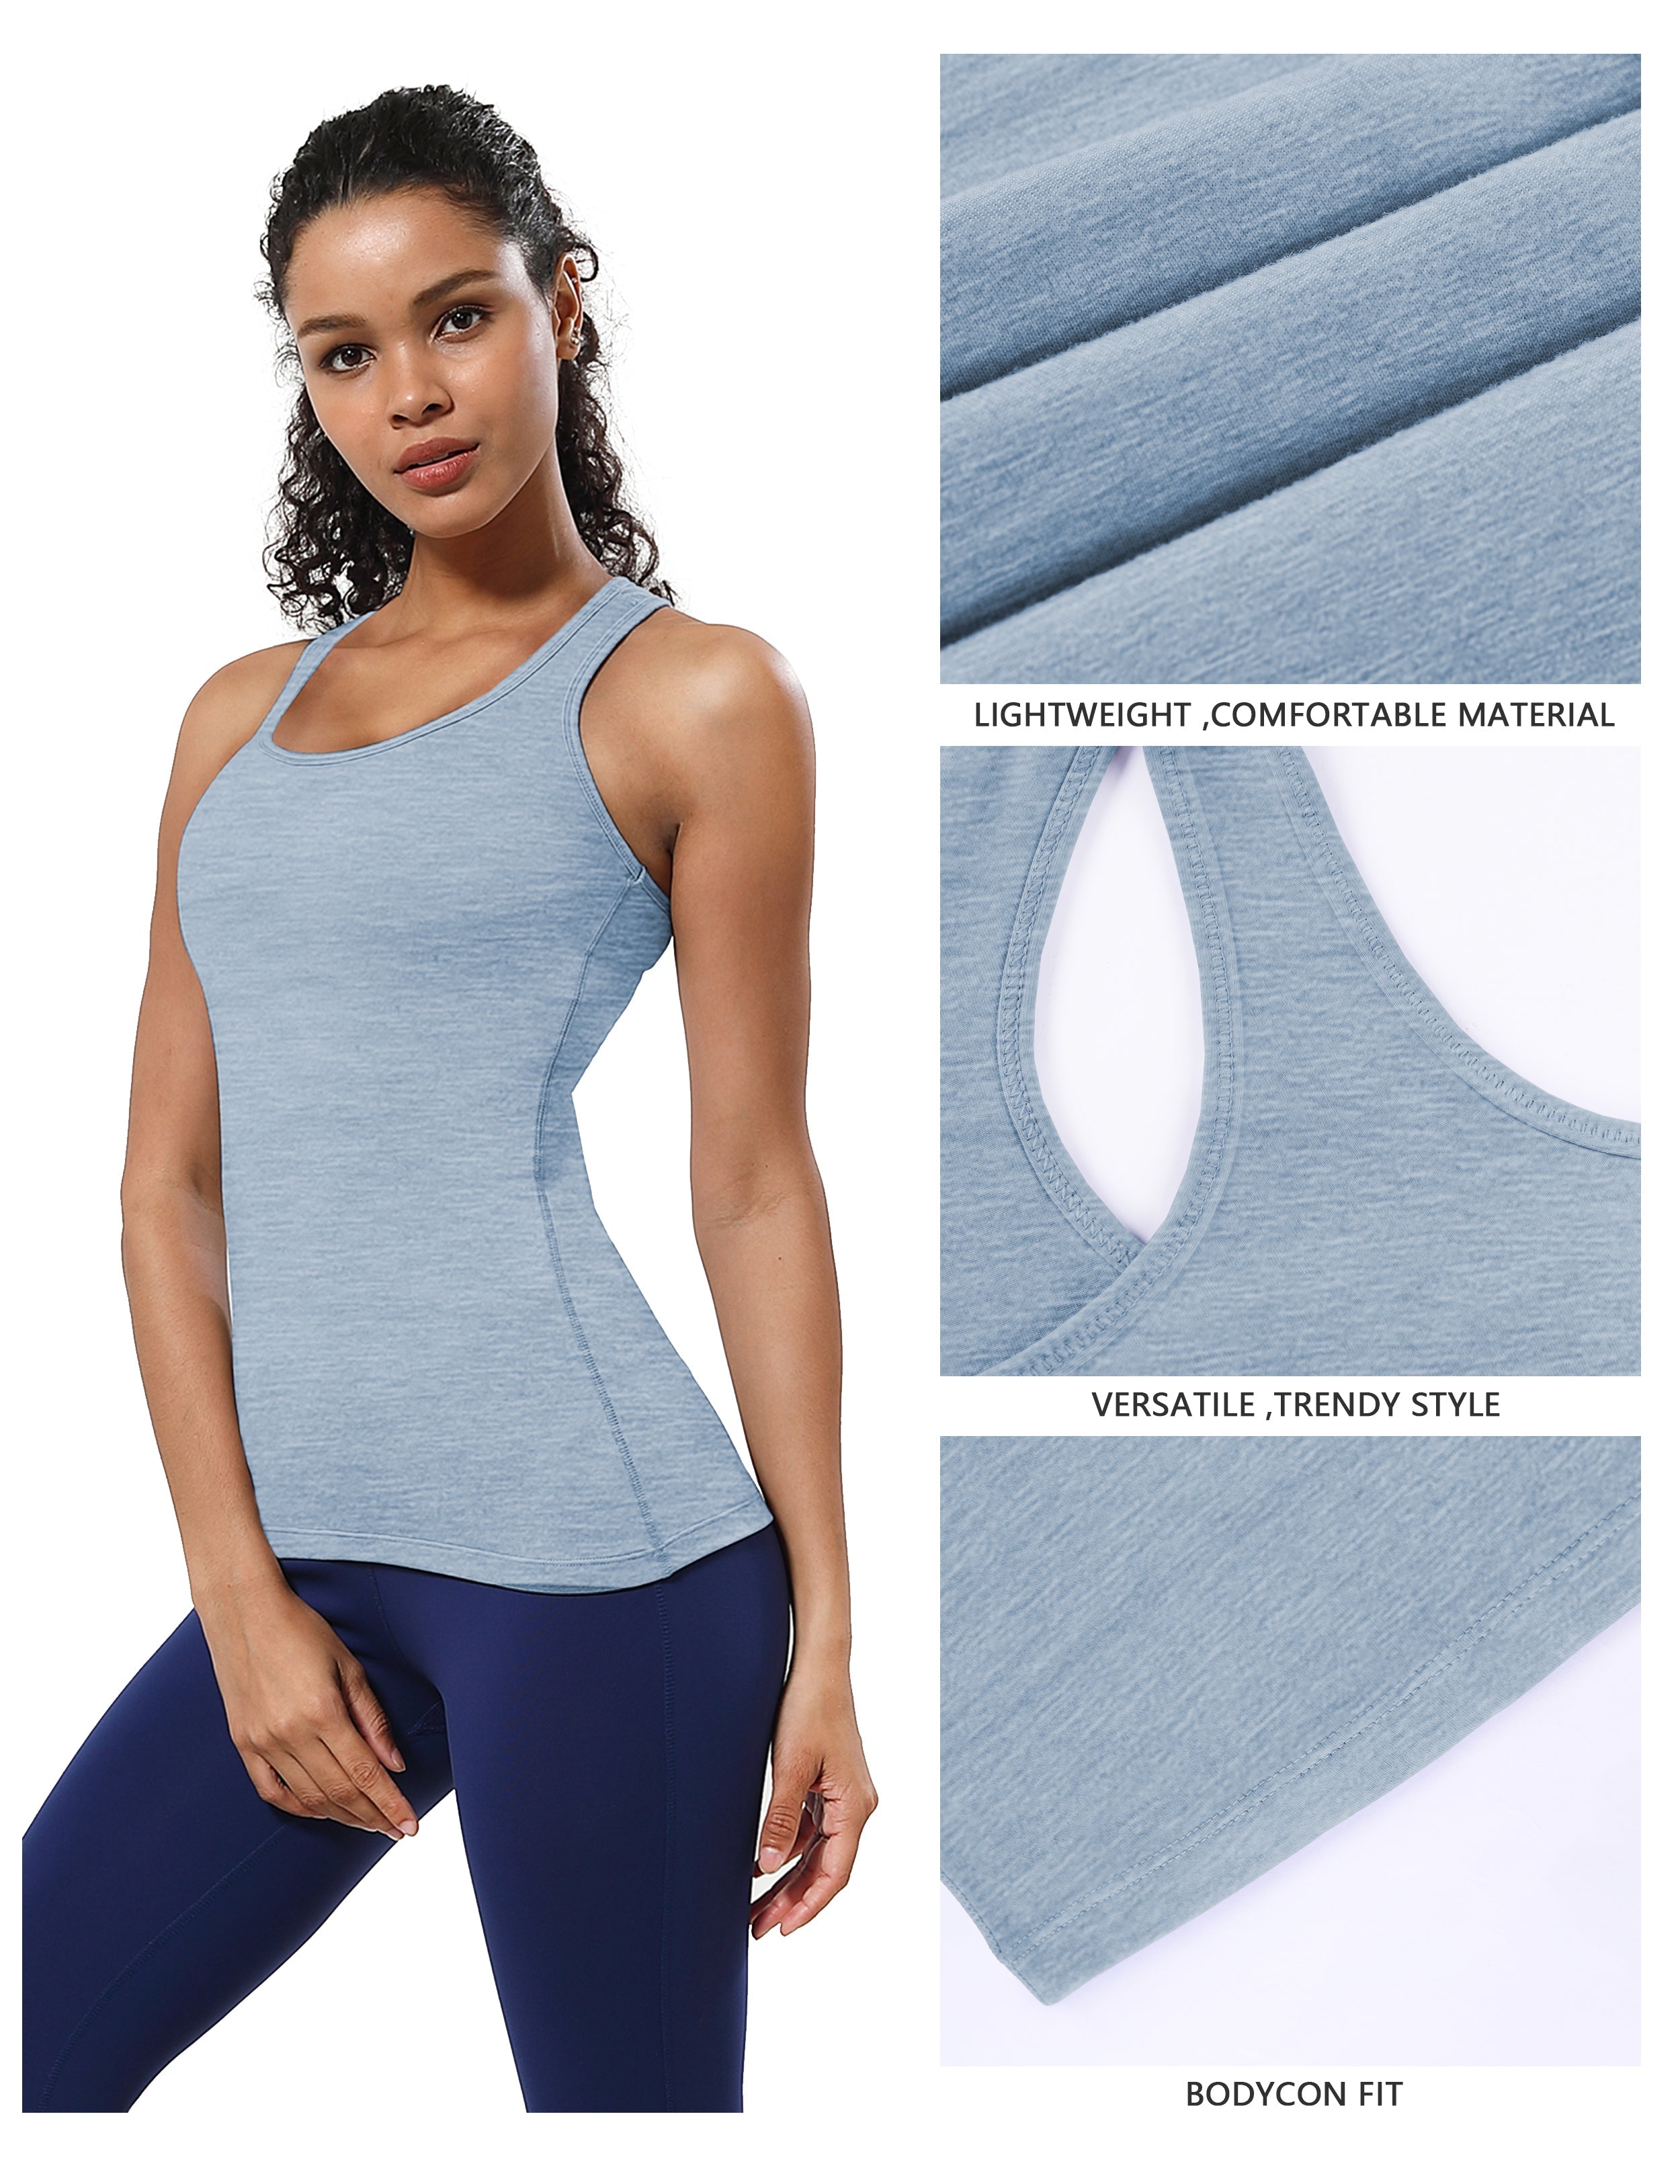 Racerback Athletic Tank Tops heatherblue 92%Nylon/8%Spandex(Cotton Soft) Designed for Pilates Tight Fit So buttery soft, it feels weightless Sweat-wicking Four-way stretch Breathable Contours your body Sits below the waistband for moderate, everyday coverage